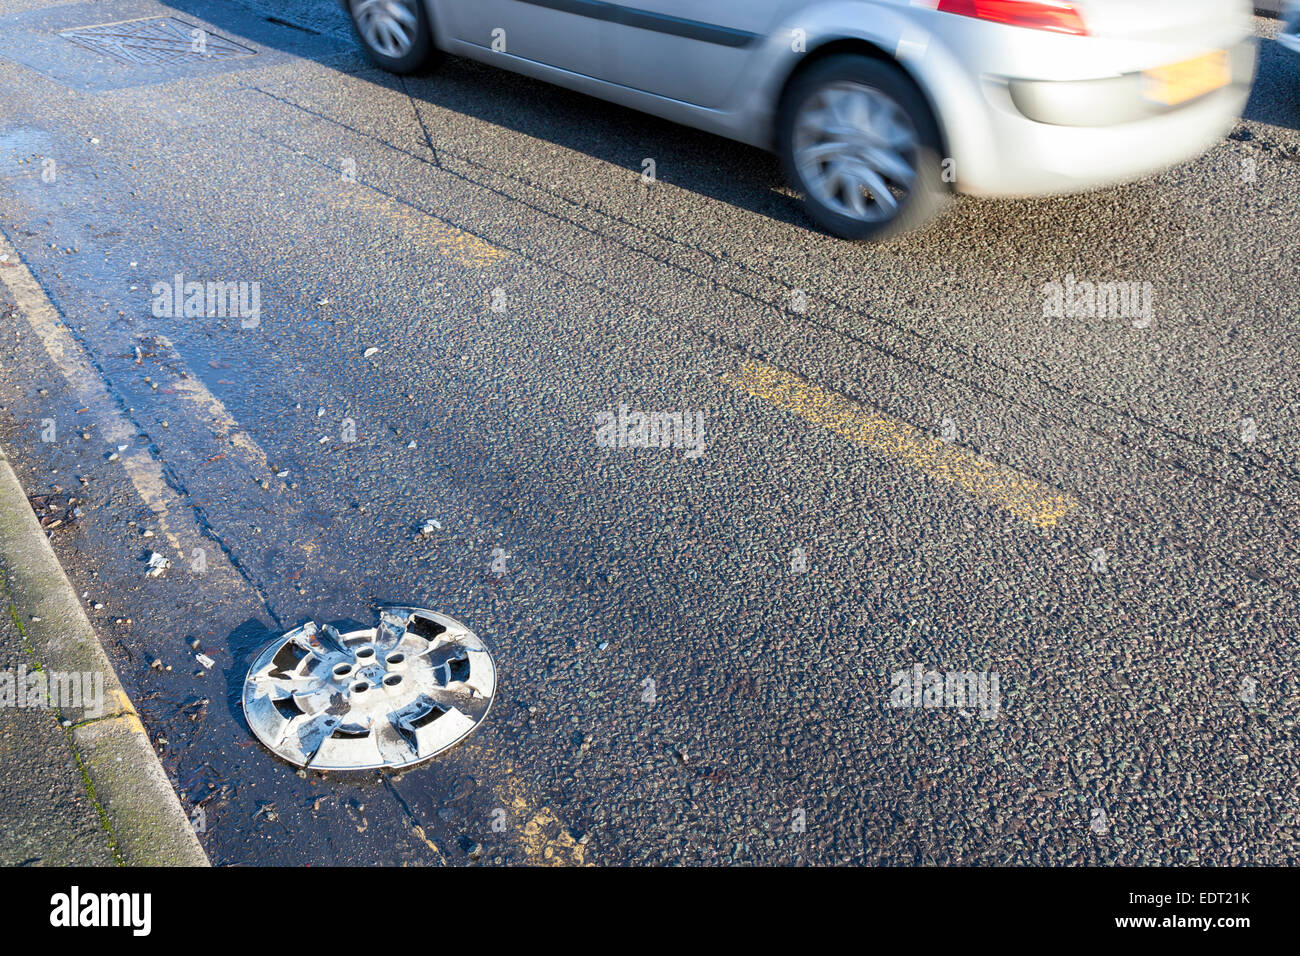 Wheel trim or cover on the road that has fallen off a car, England, UK Stock Photo